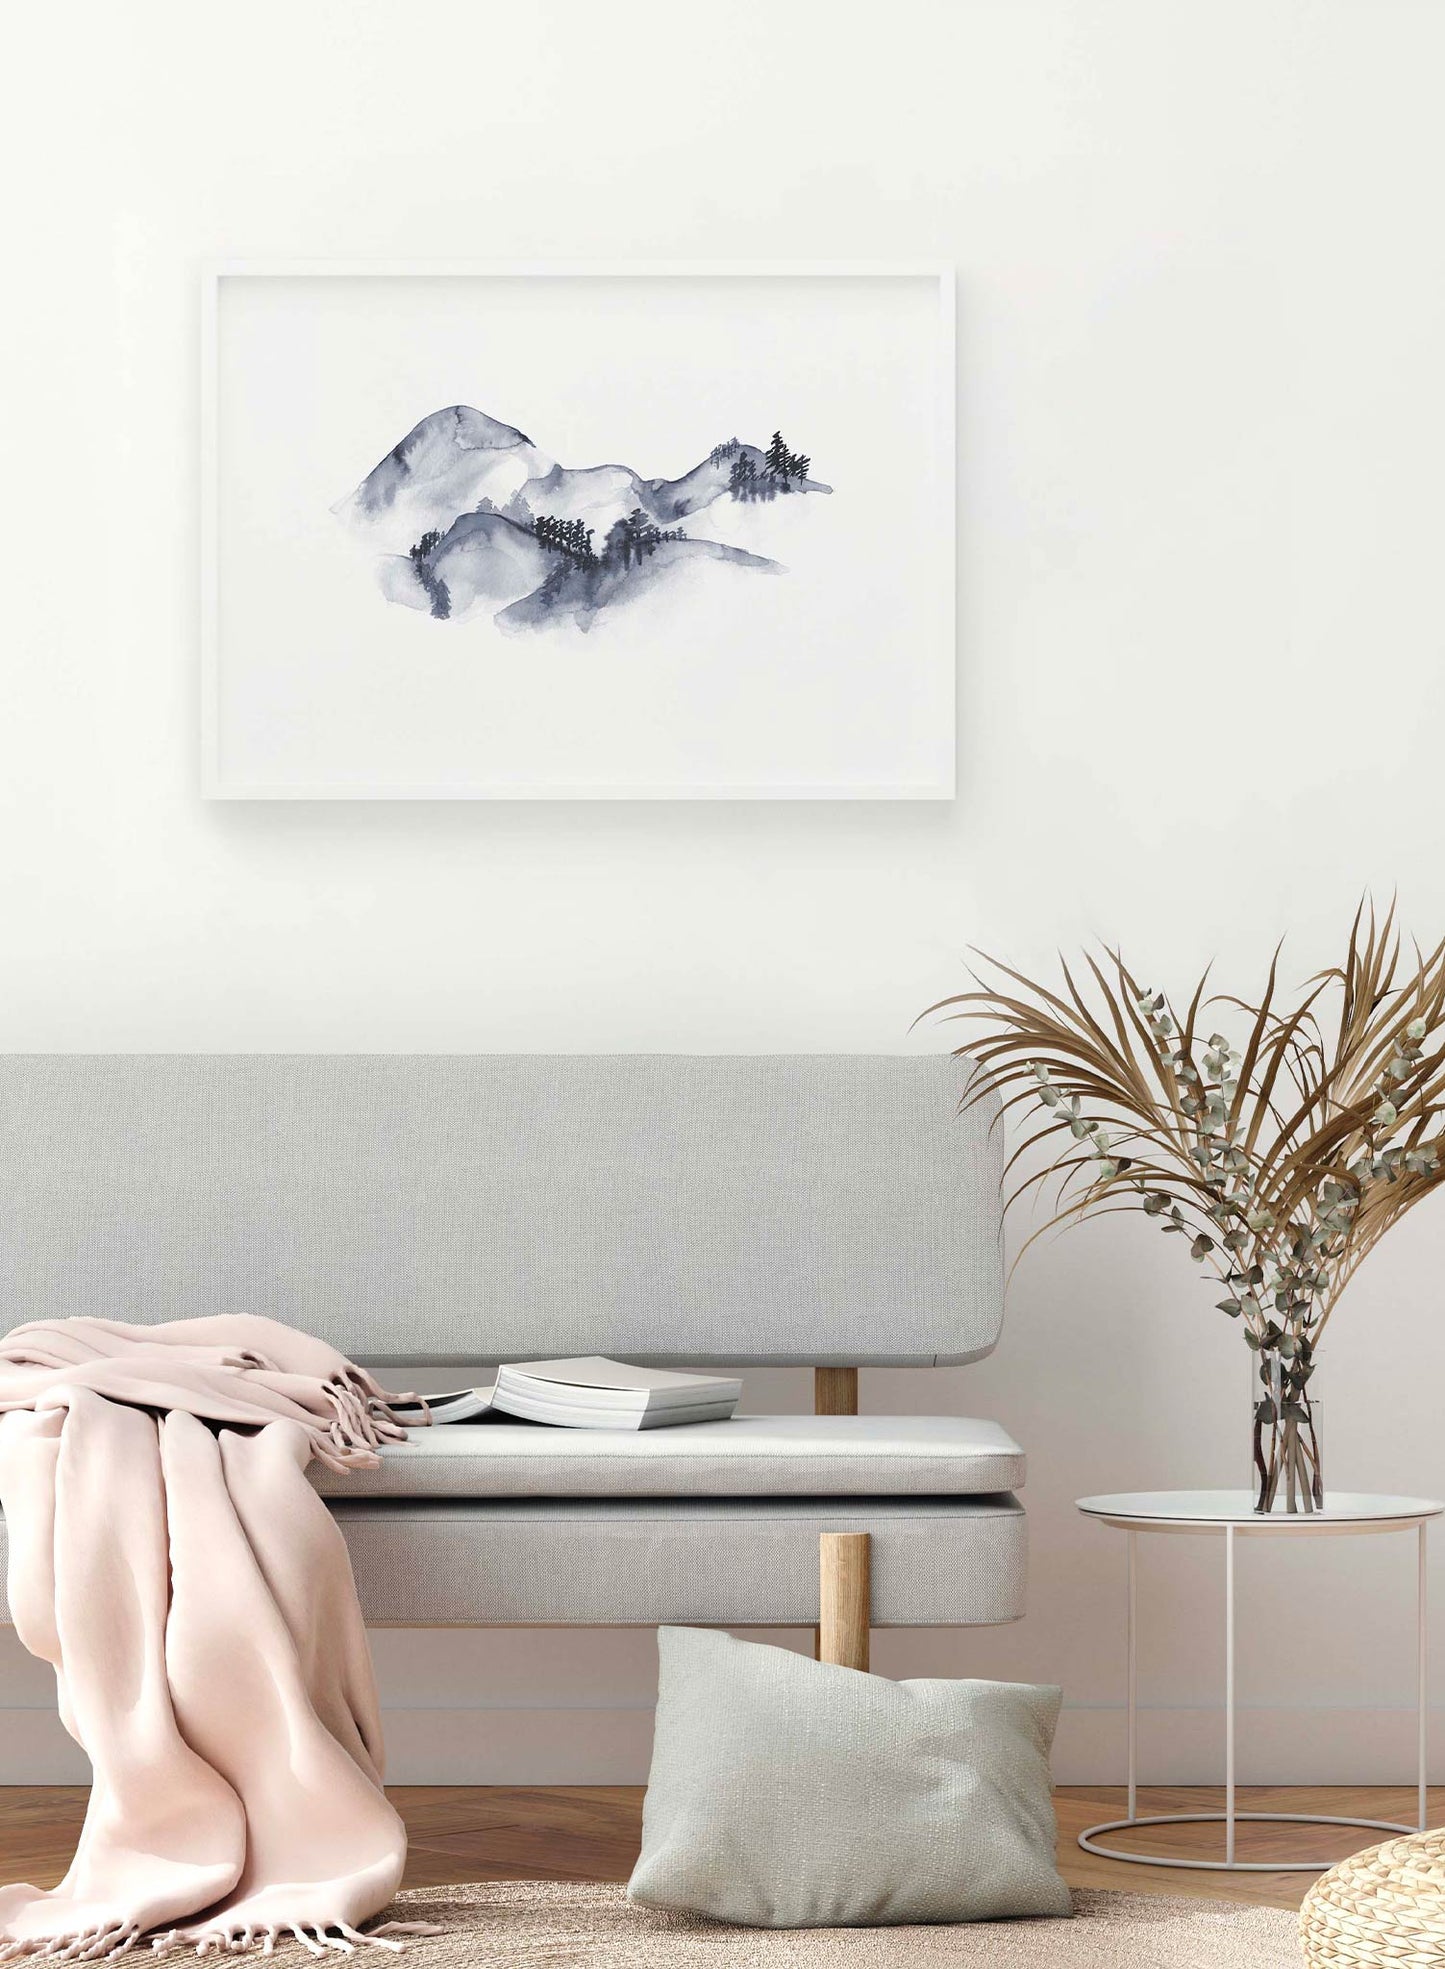 Japanese Panorama is a minimalist illustration by Opposite Wall of a view of Japan's mountains and forests drawn in ink.